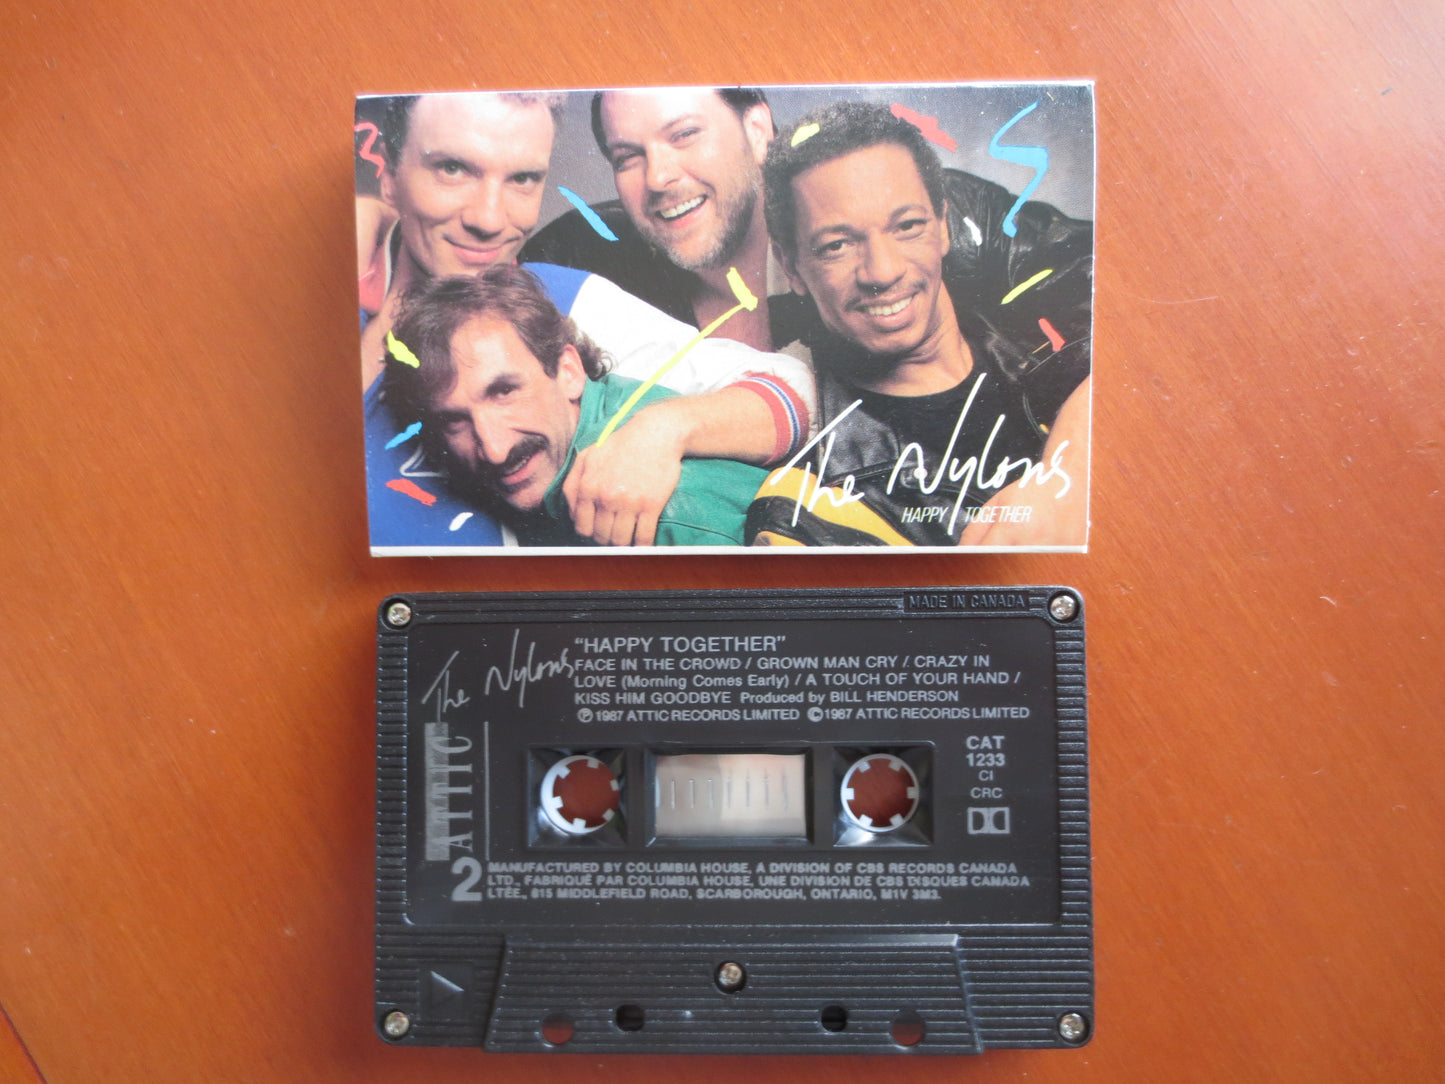 The NYLONS, HAPPY TOGETHER, The Nylons Tape, The Nylons Album, The Nylons Cassette, Tape Lp, The Nylons Lp, 1987 Cassette